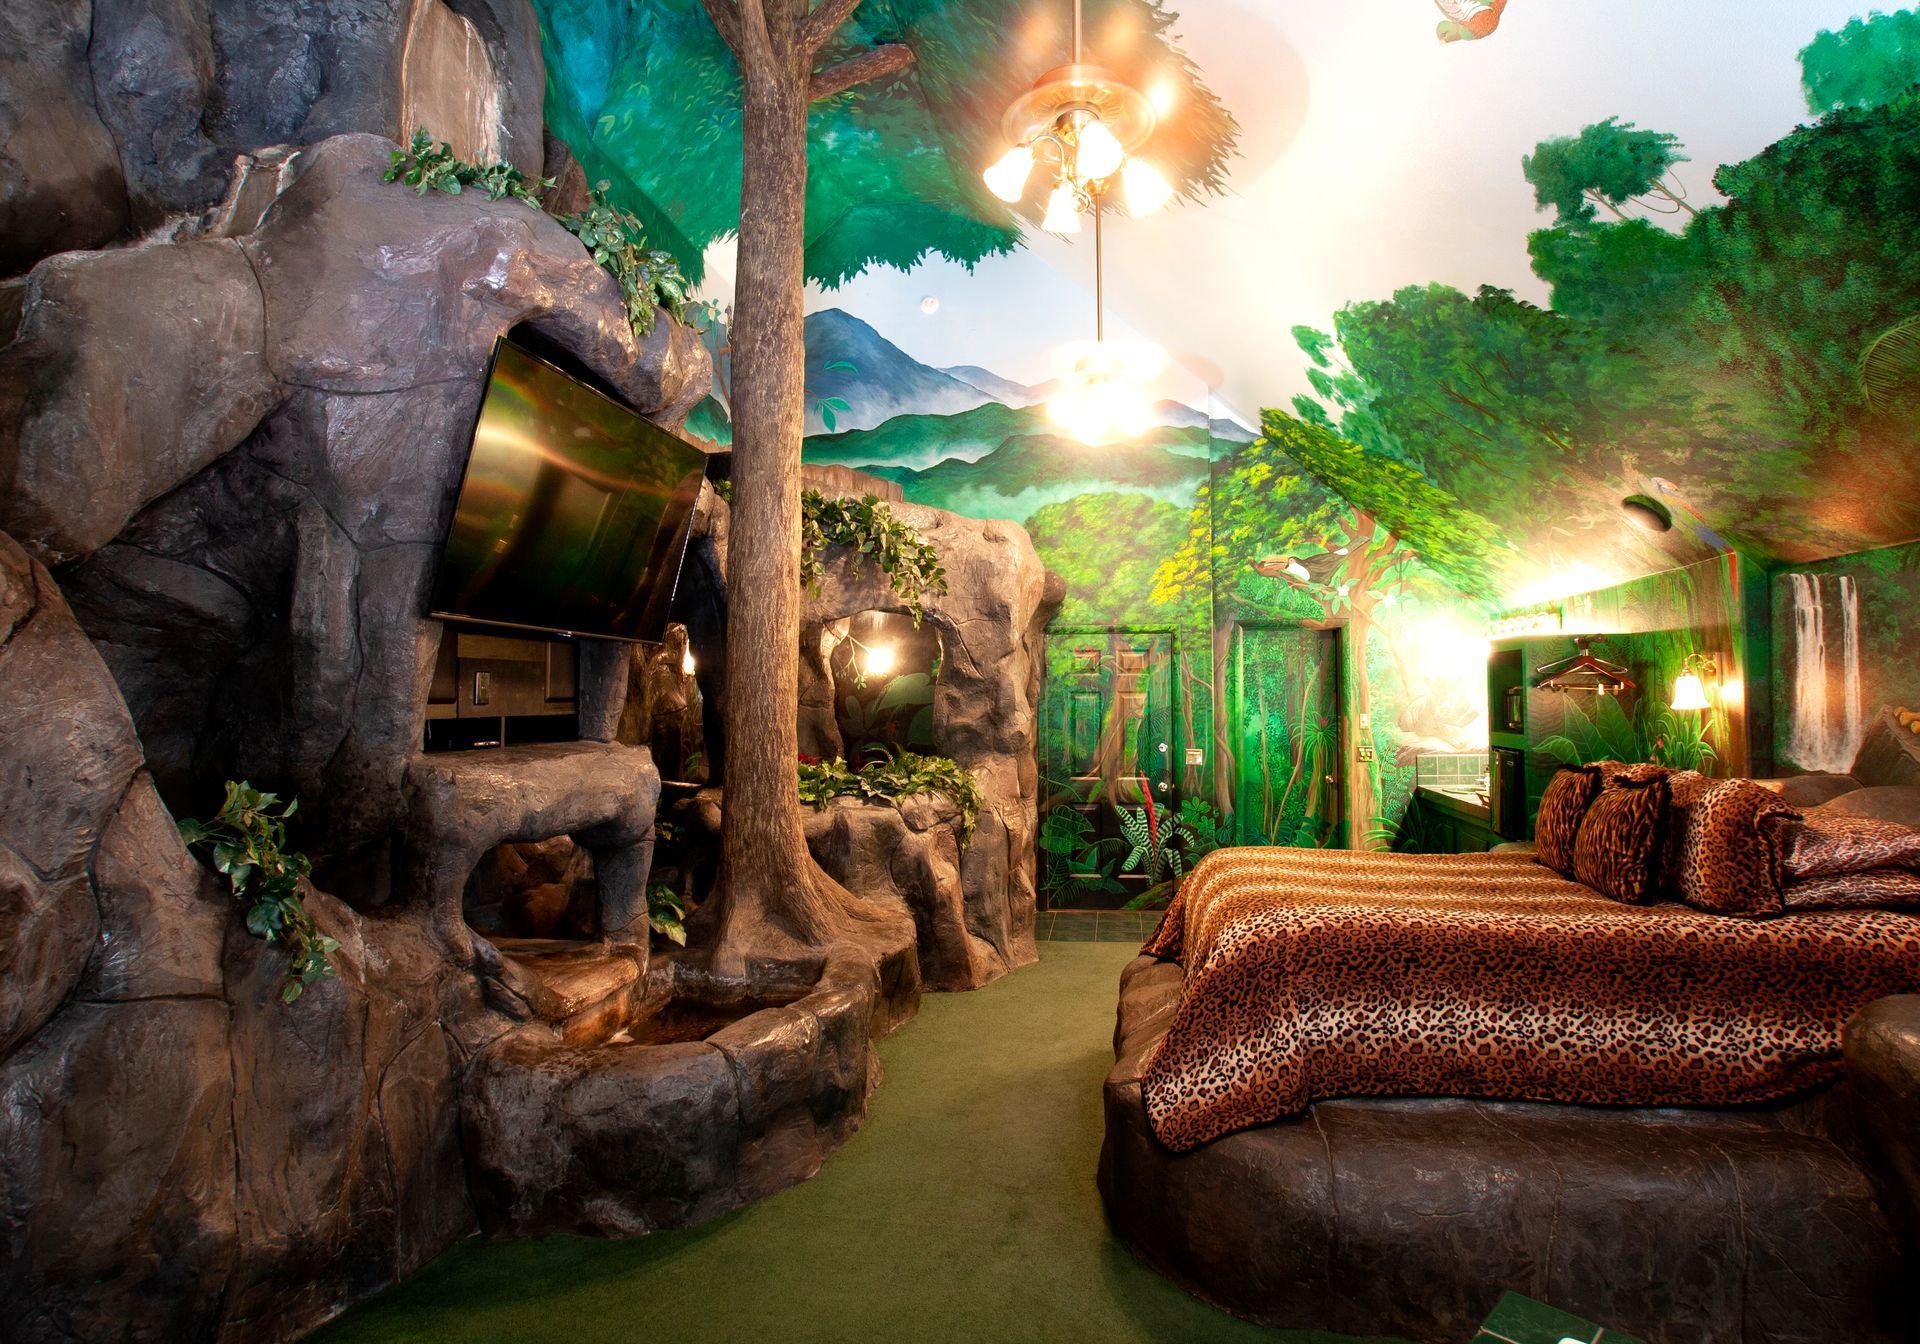 A bedroom that looks like a jungle with trees and rocks